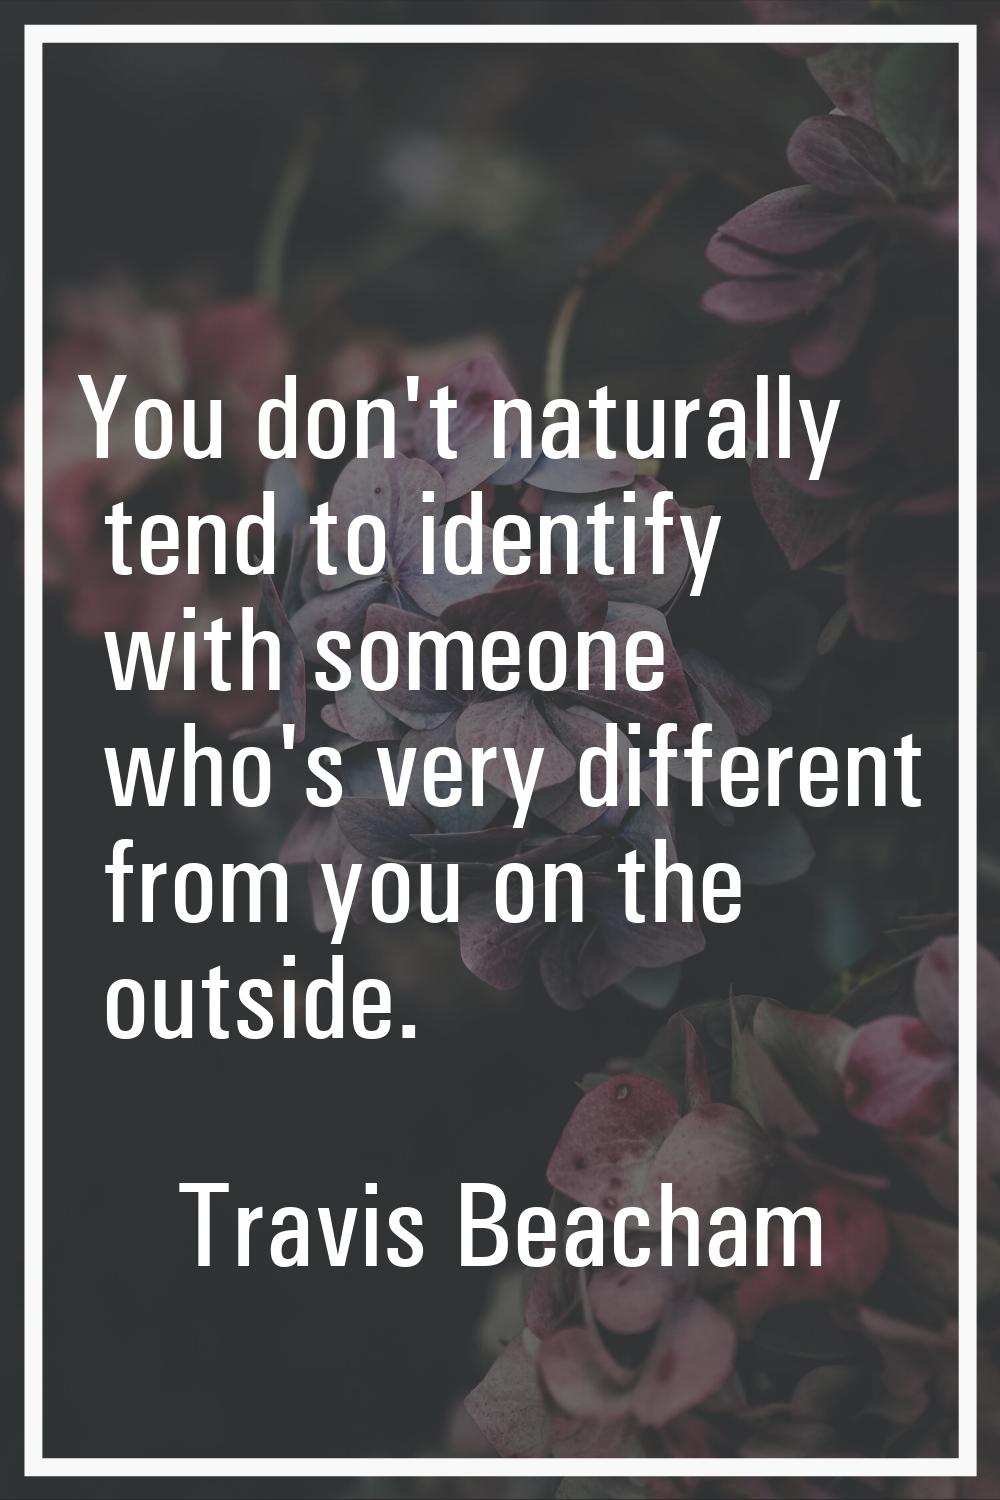 You don't naturally tend to identify with someone who's very different from you on the outside.